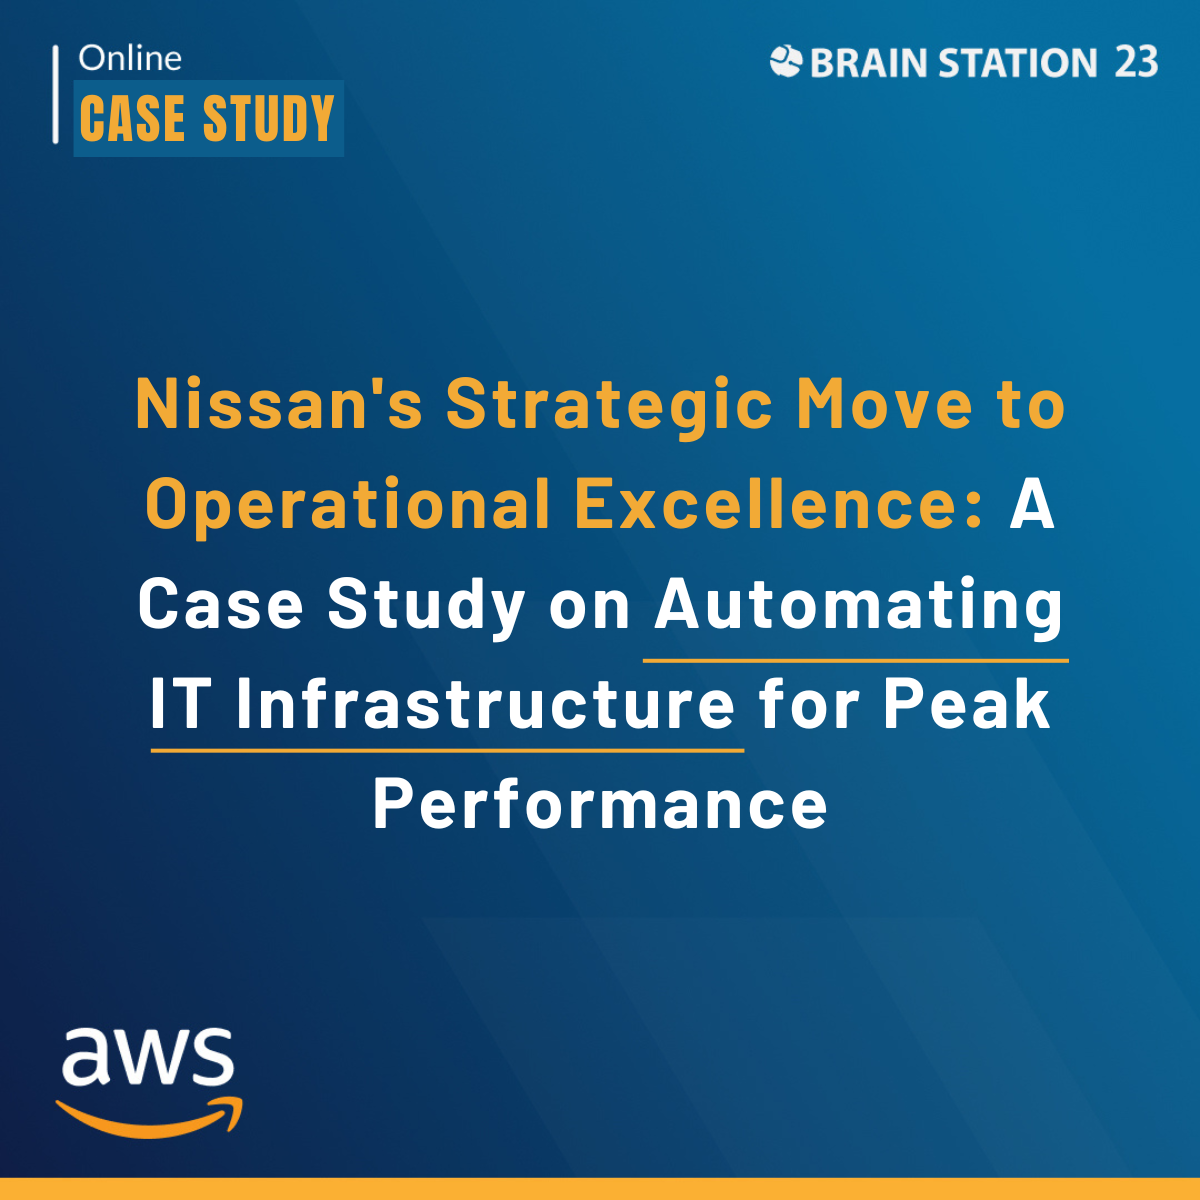 Nissan's Strategic Move to Operational Excellence